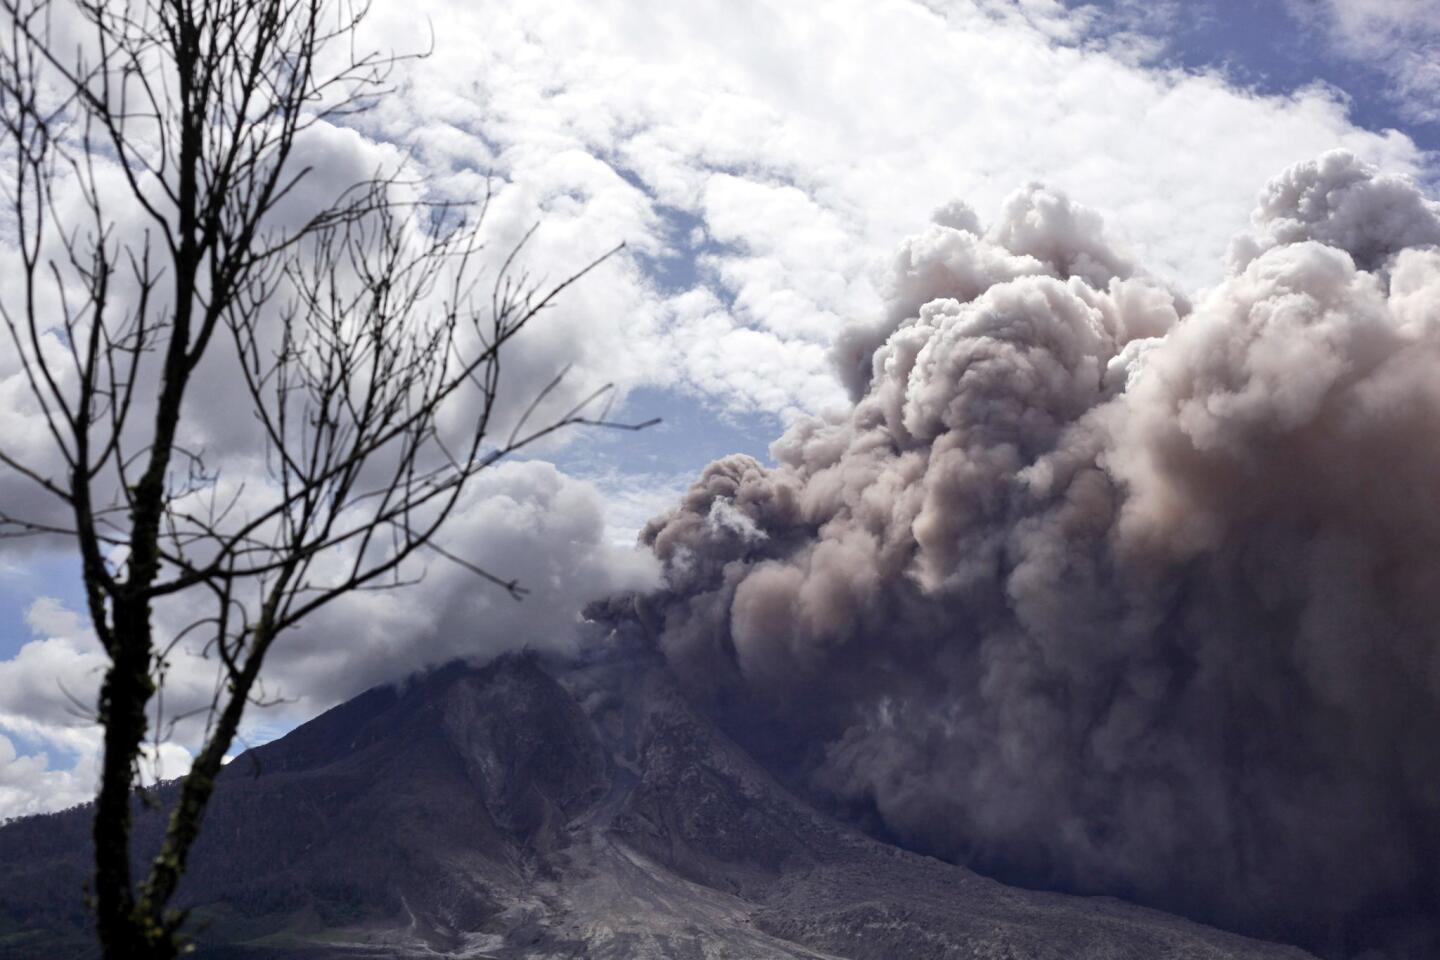 Mount Sinabung releases